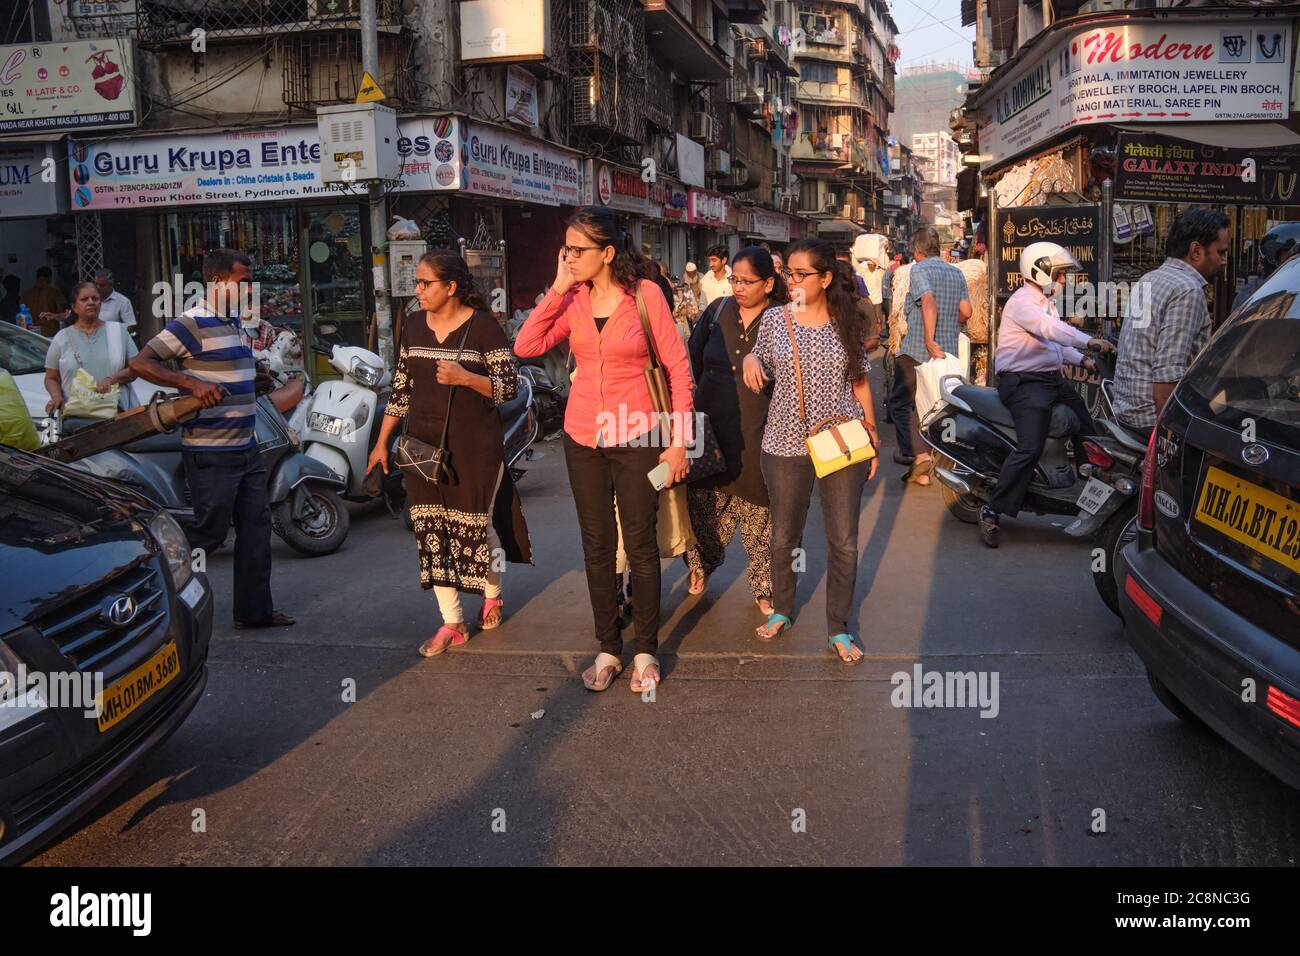 A group of women try to cross busy and congested Kalbadevi Road in Bhuleshwar trading area, Mumbai, India Stock Photo